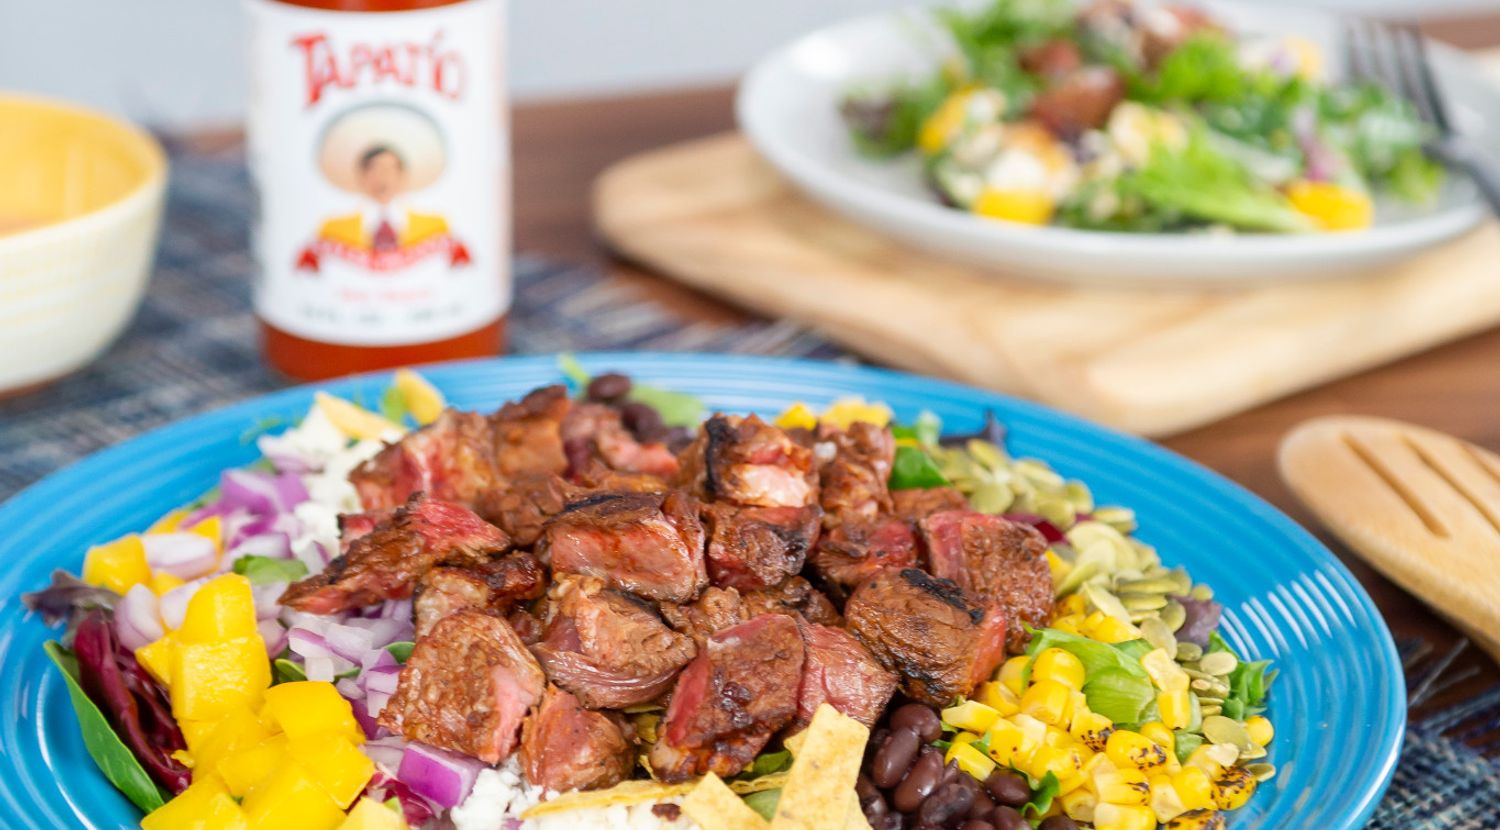 South-of-the-Border Chopped Steak Salad with Creamy Tapatio Hot Sauce™ Dressing